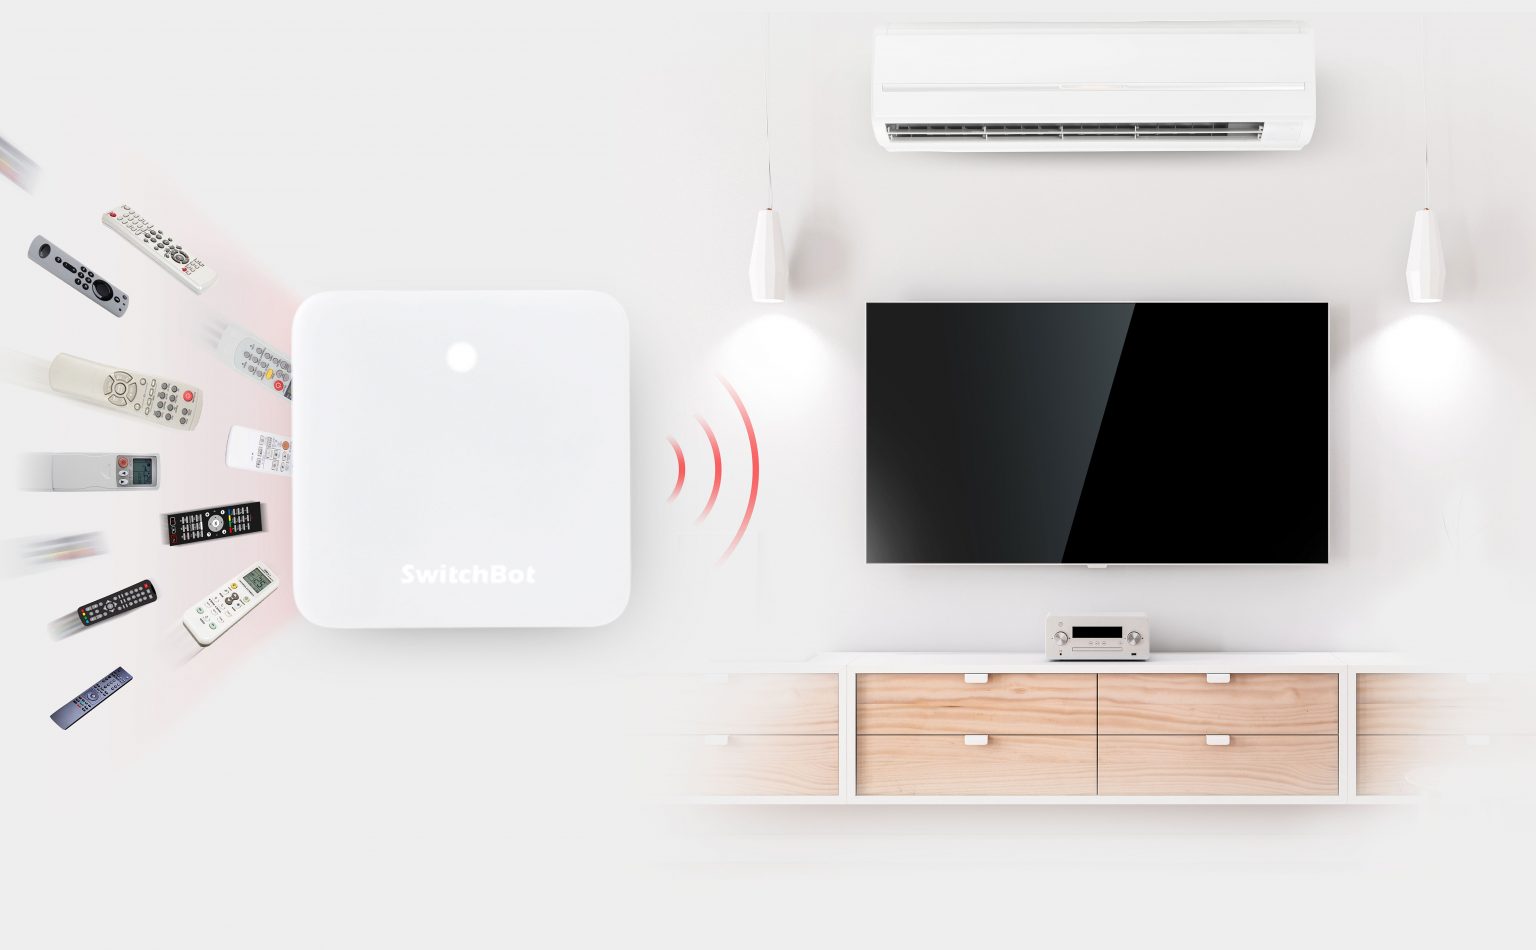 SwitchBot Hub Mini simplifies and enhances your home automation.